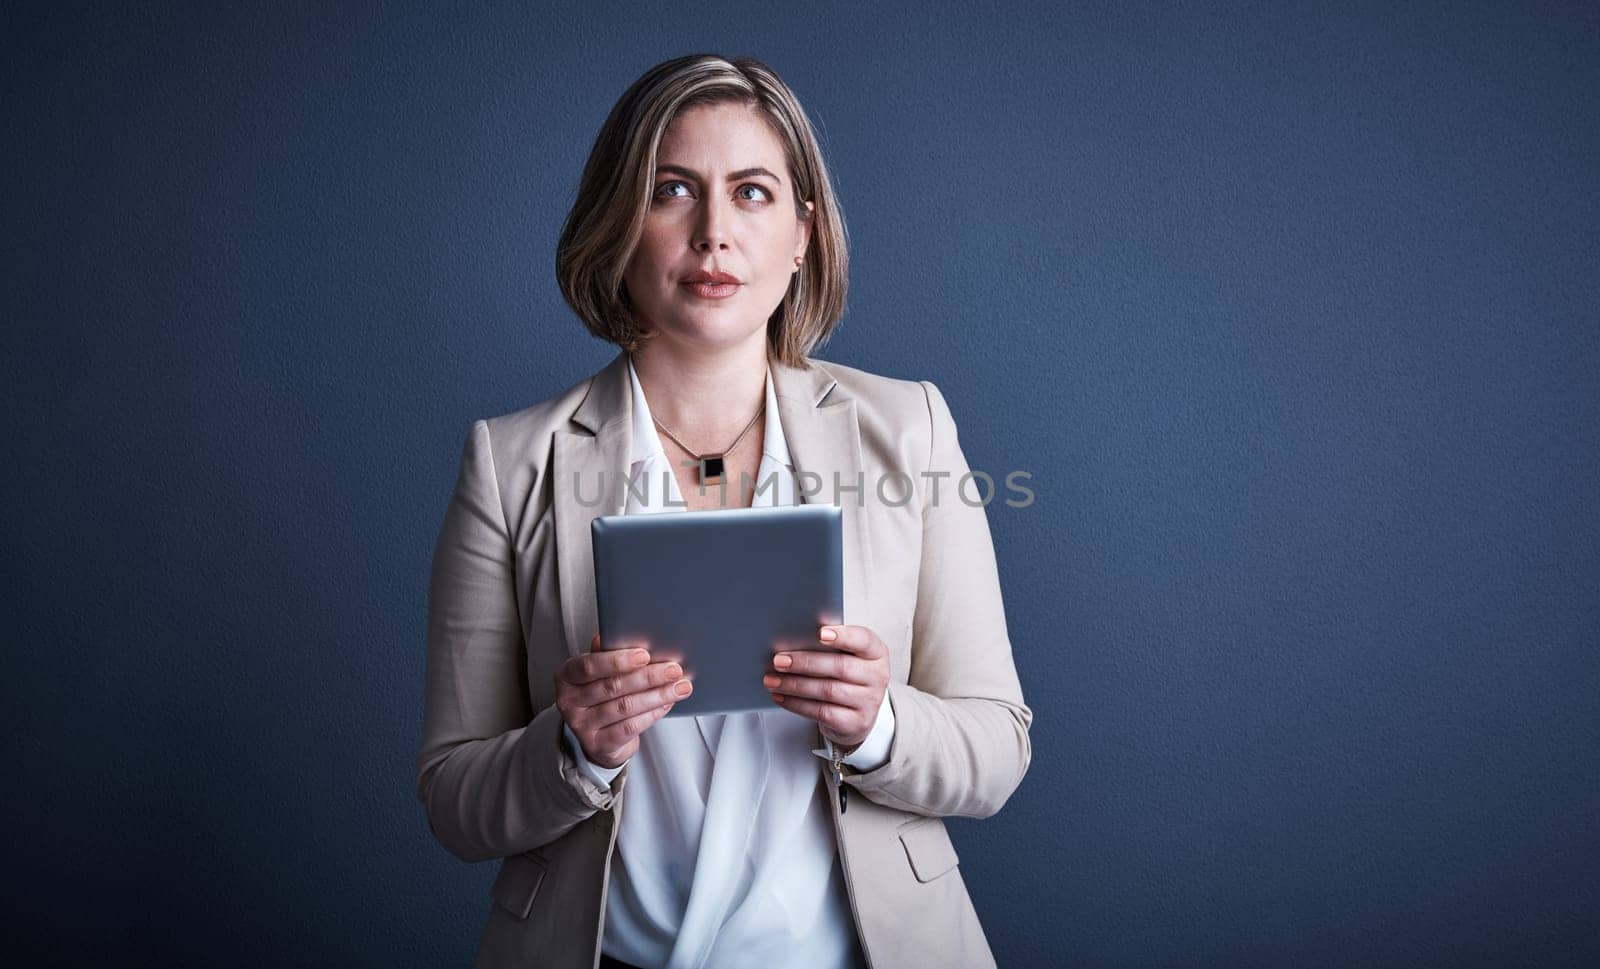 Let me see now...Studio shot of an attractive young corporate businesswoman using a tablet against a dark background